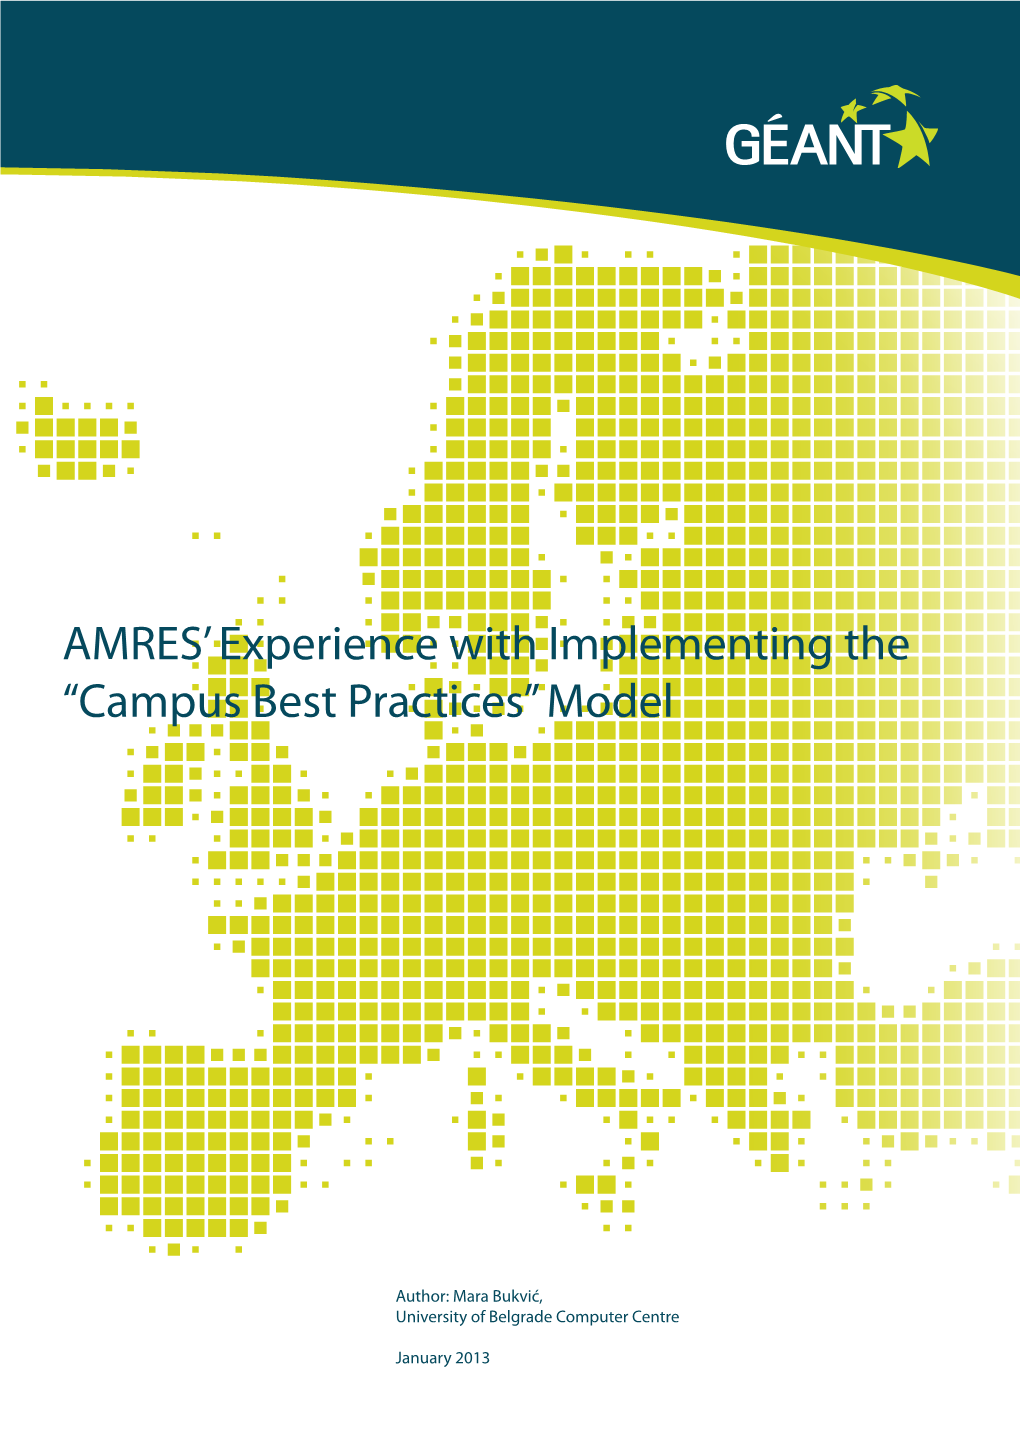 AMRES' Experience with Implementing the “Campus